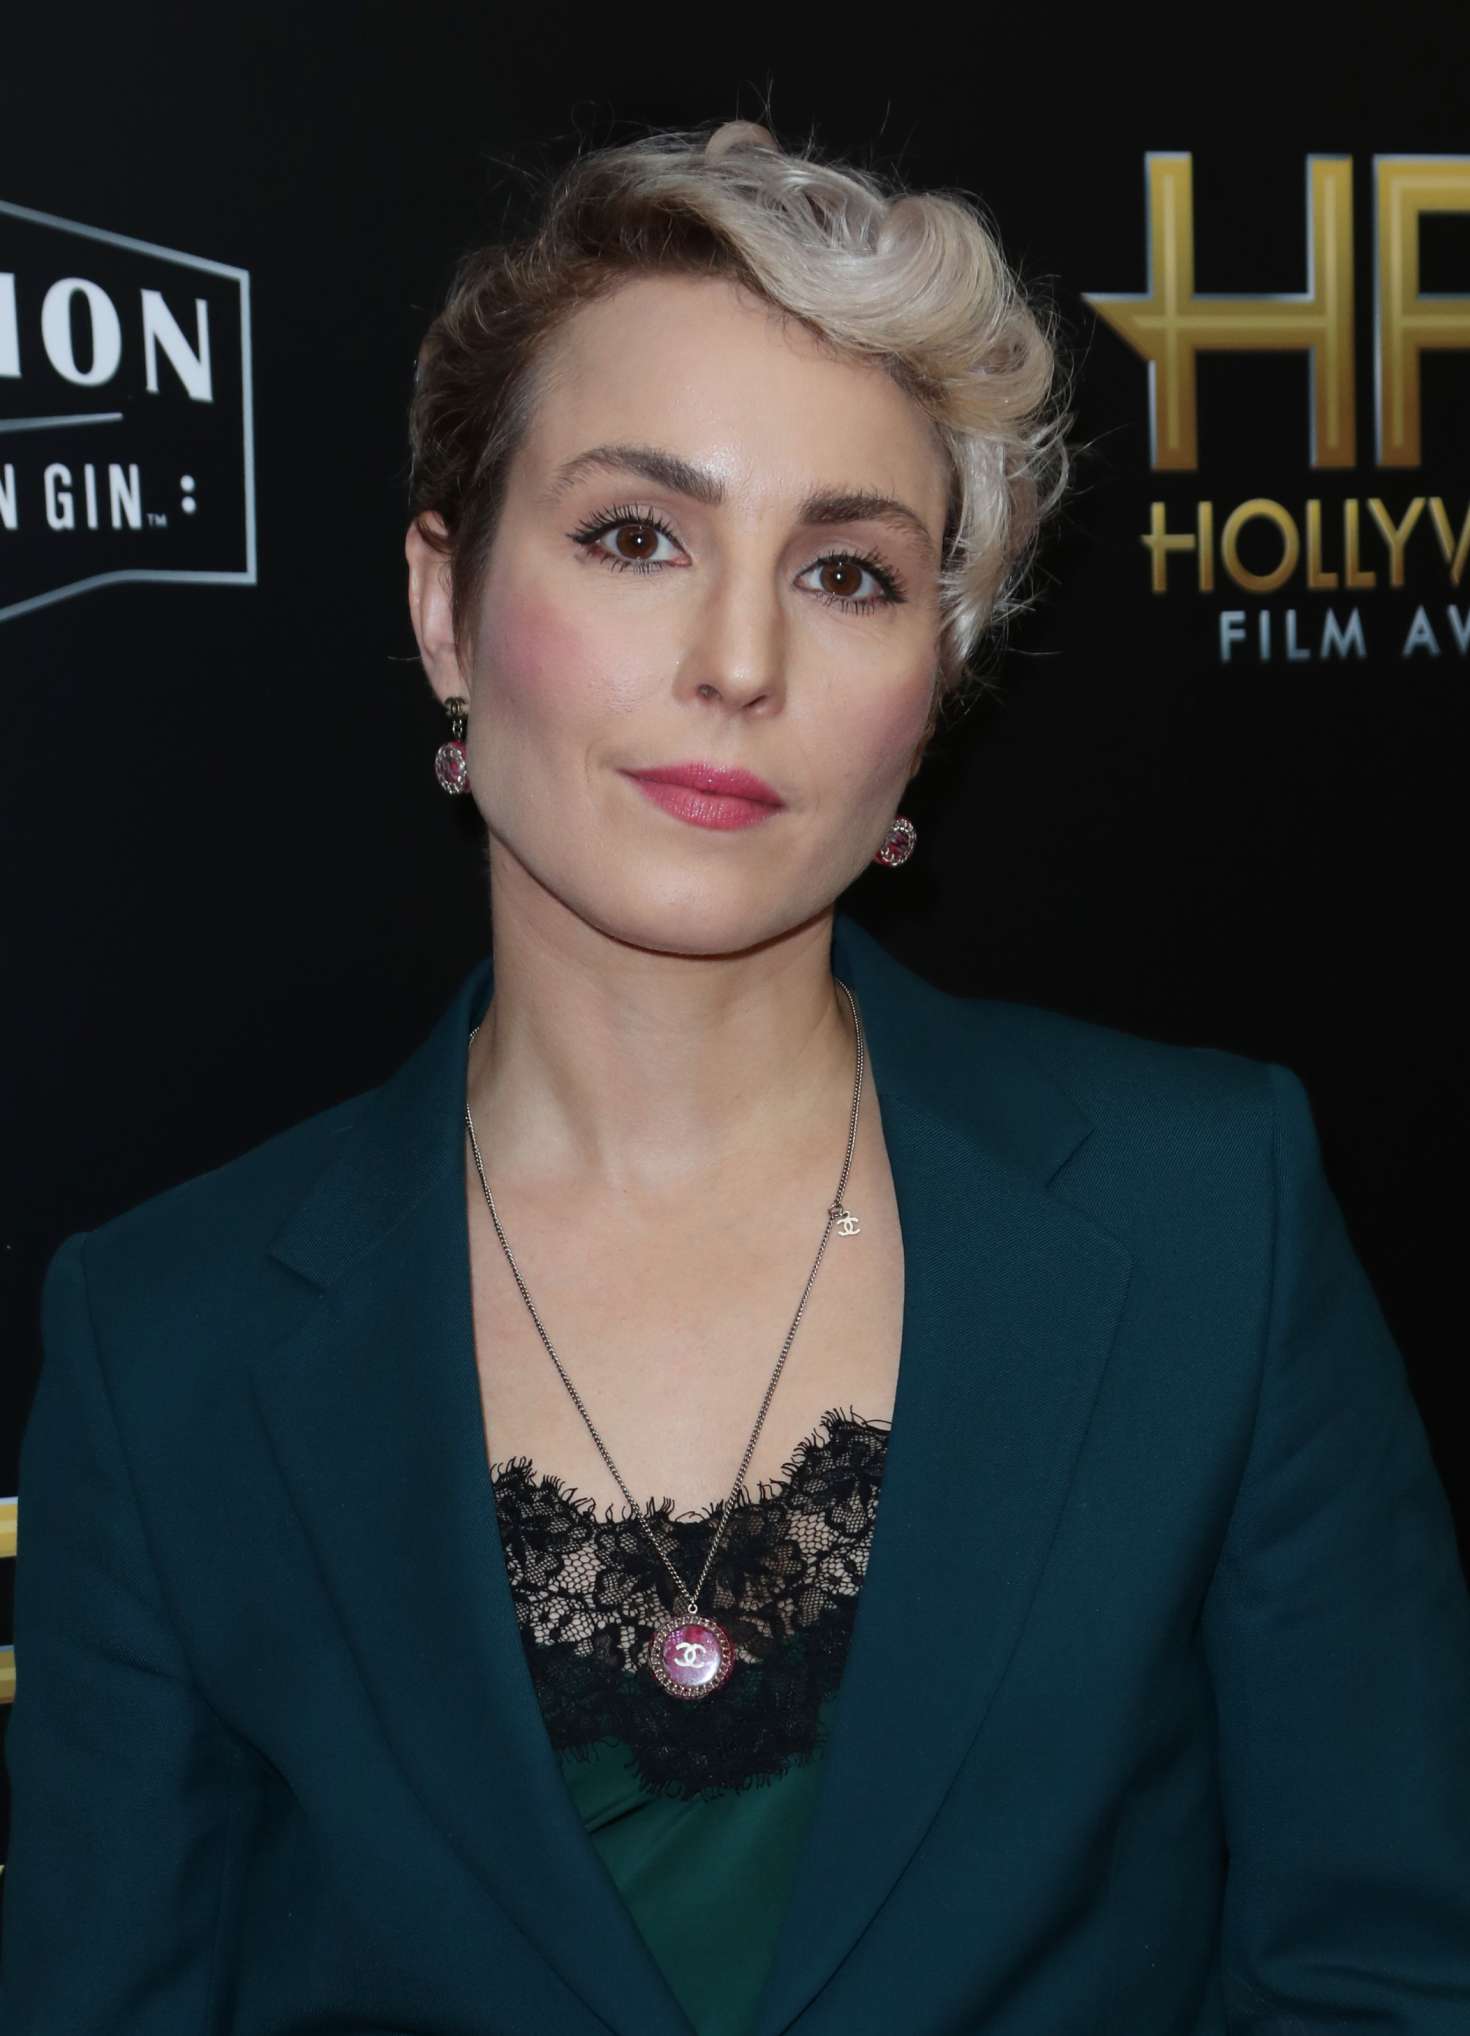 Noomi Rapace - Hollywood Film Awards 2017 in Los Angeles